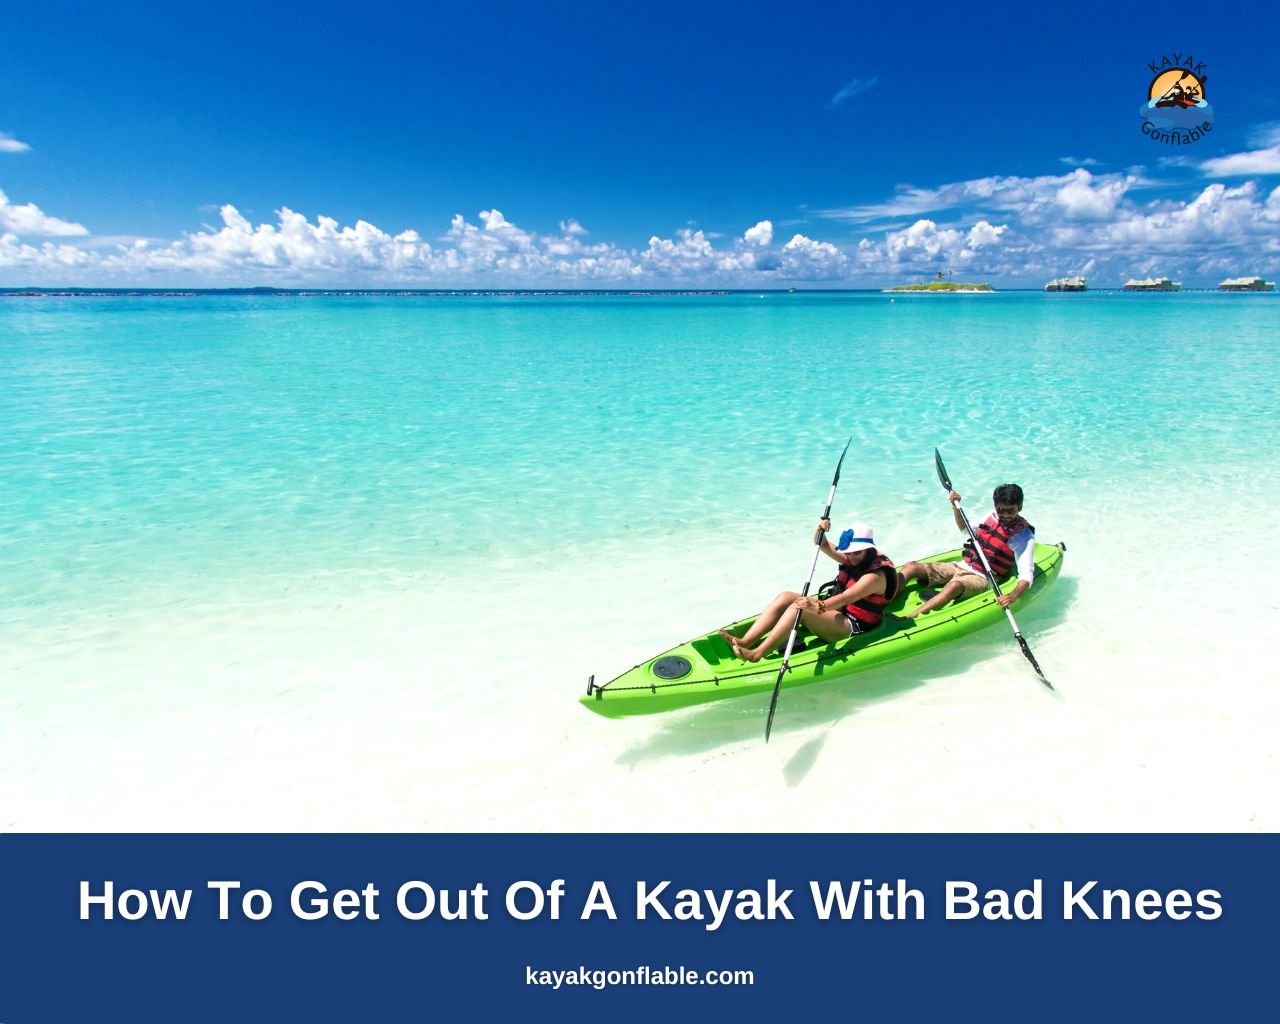 How-To-Get-Out-Of-A-Kayak-With-Bad-Knees